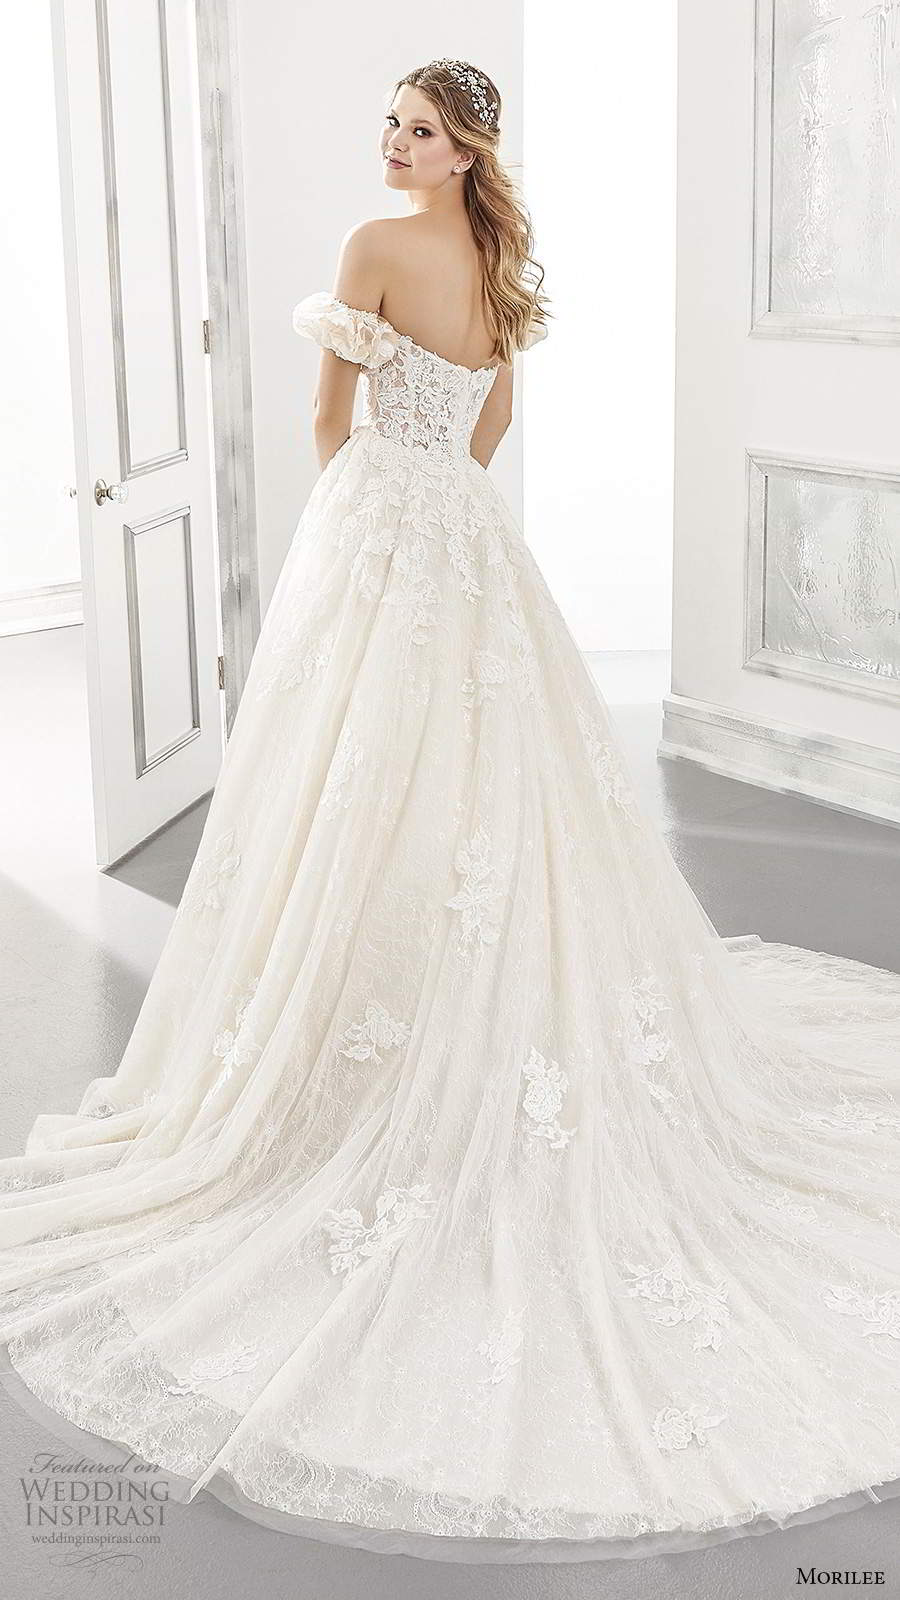 morilee spring 2021 bridal detached short puff sleeves strapless sweetheart neckline embellished bodice a line ball gown wedding dress cathedral train (17) bv